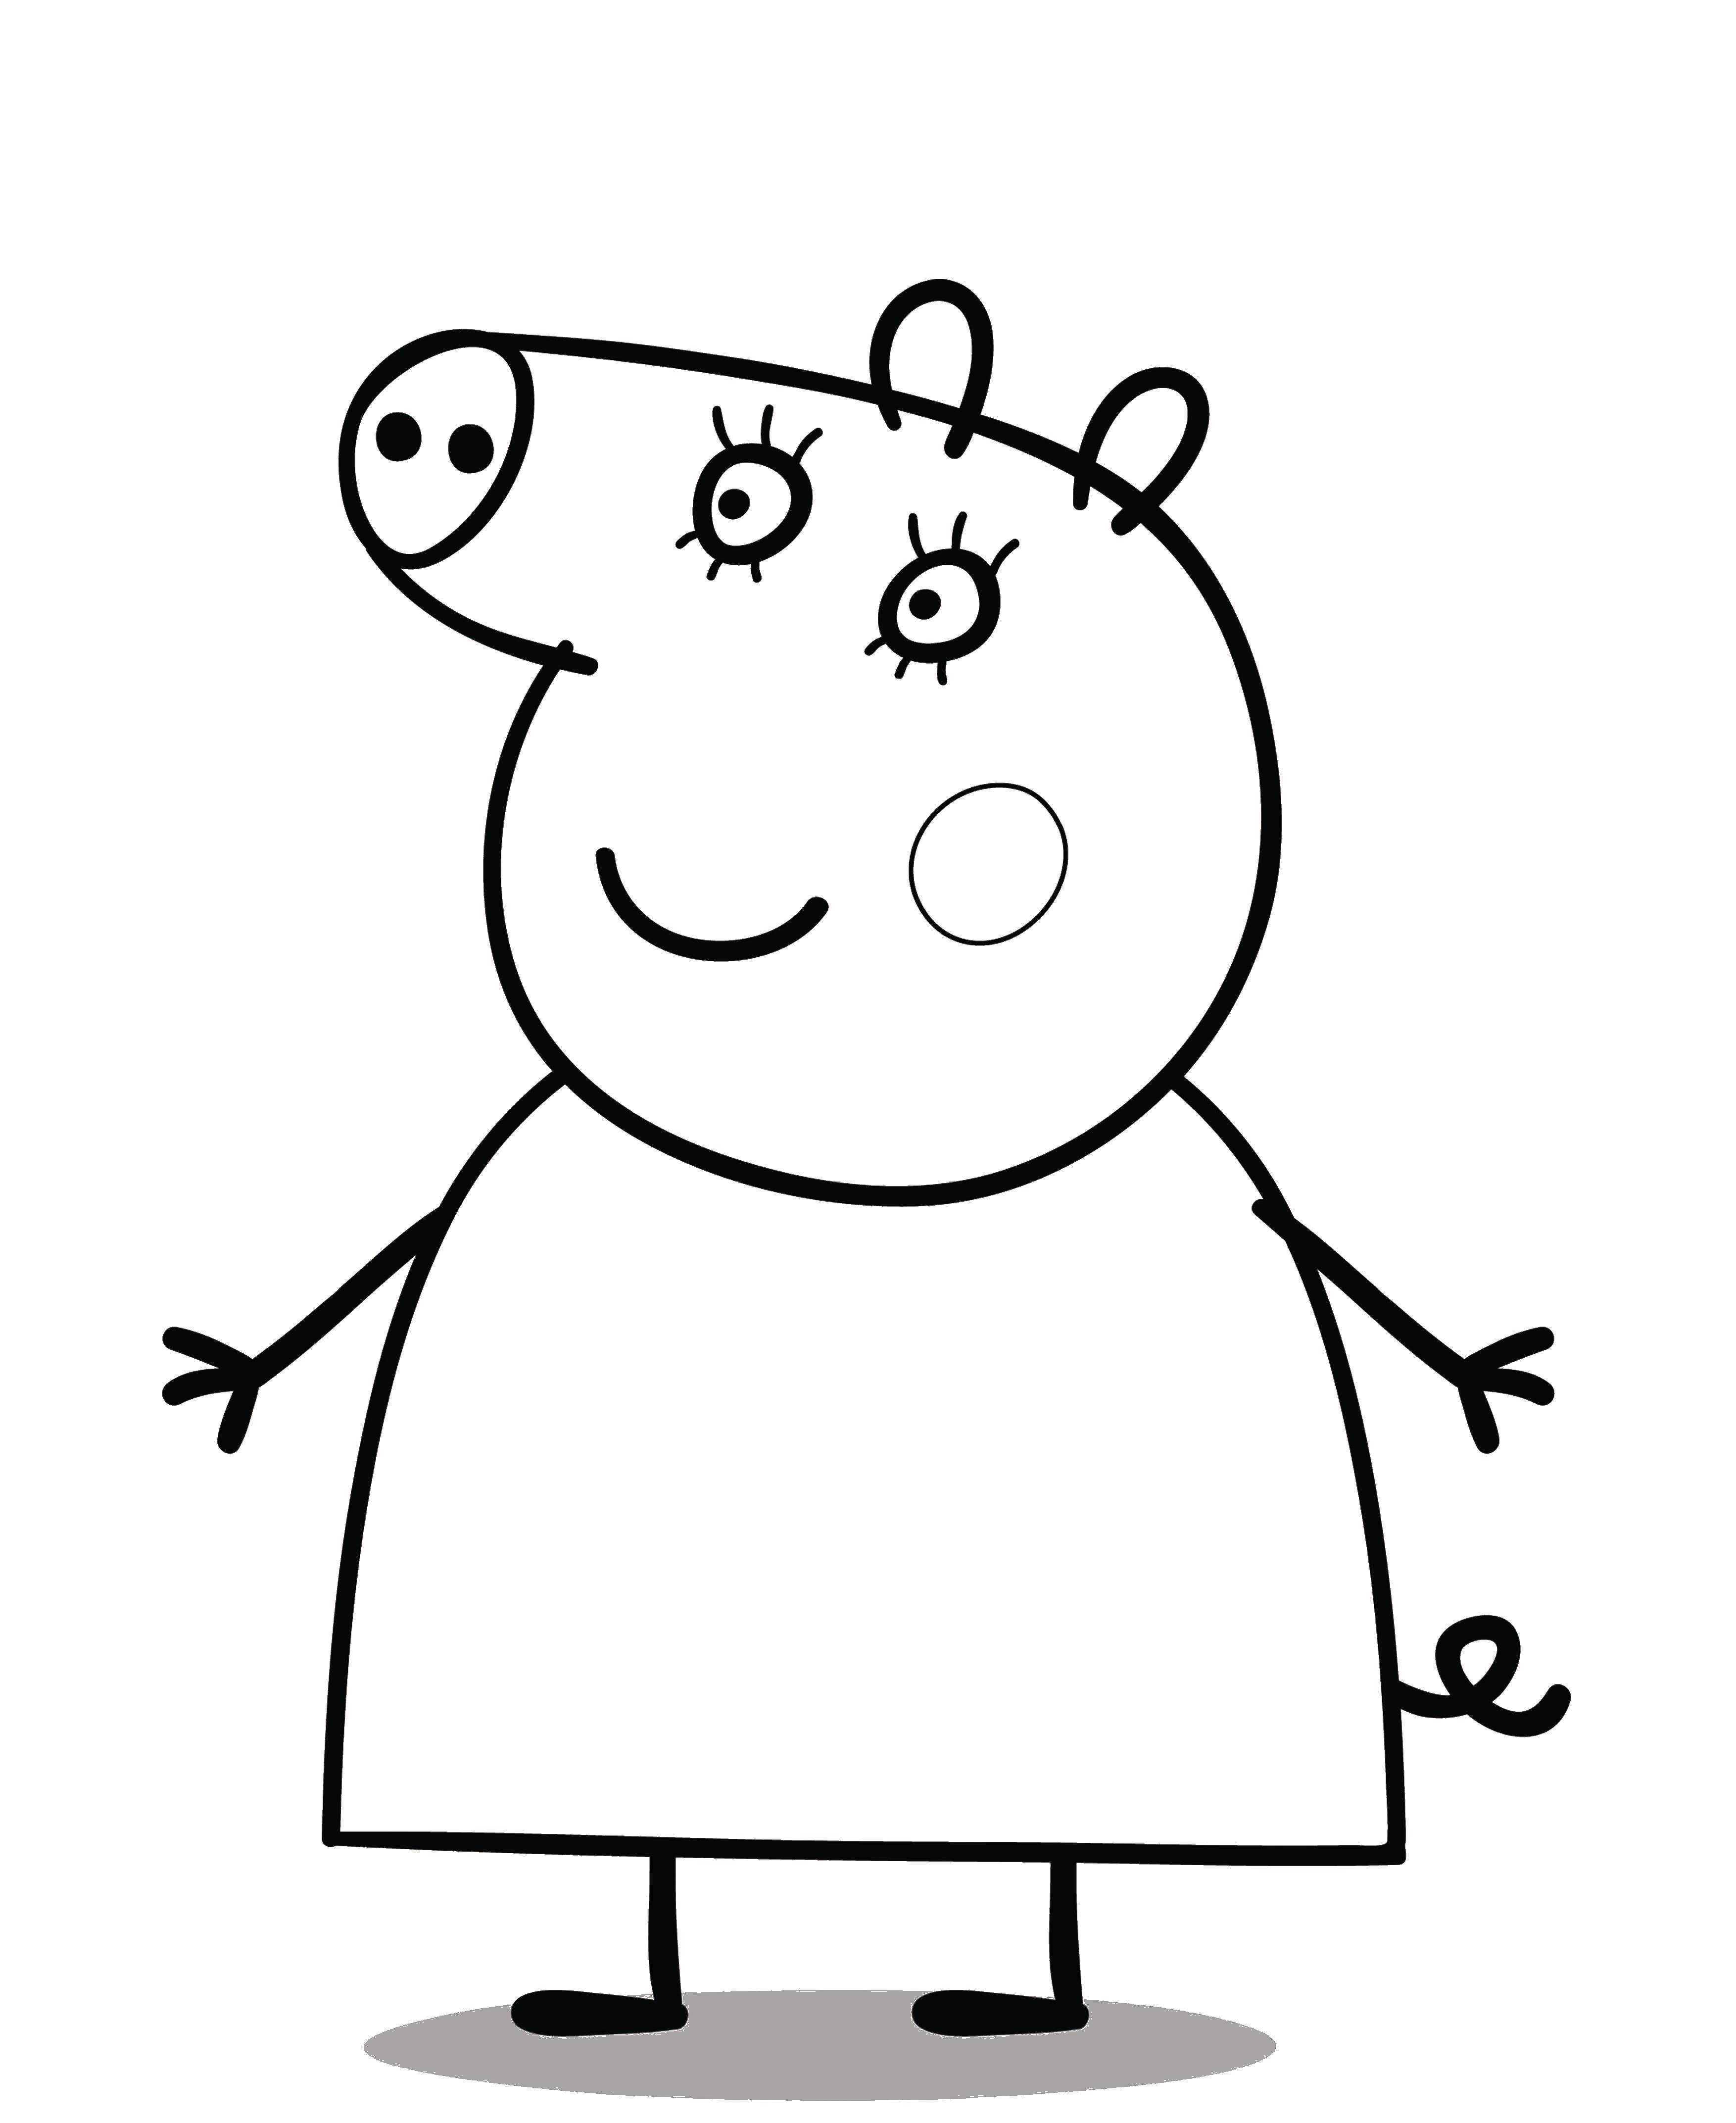 Coloring Mommy pig. Category Peppa Pig. Tags:  super Mario, George.